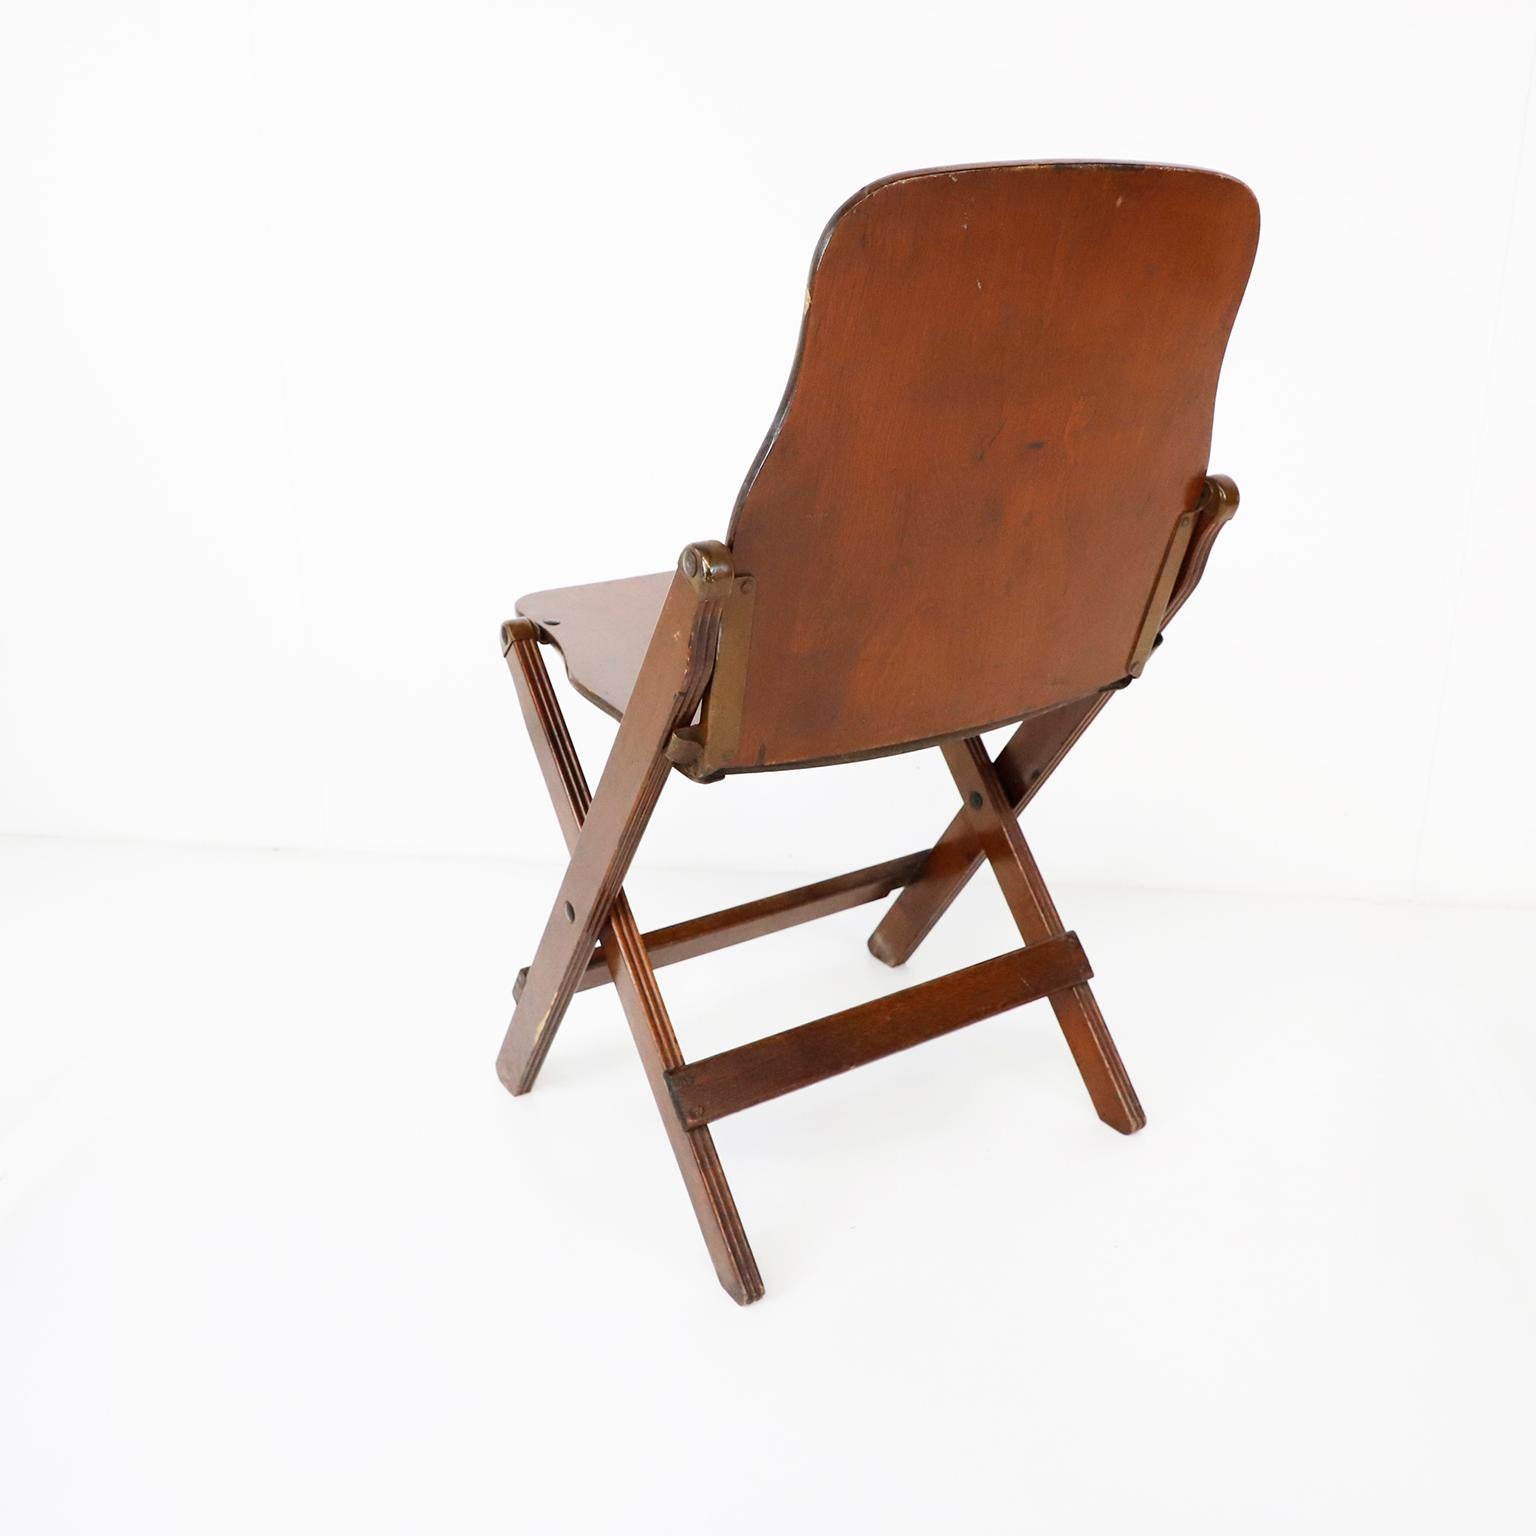 US Army American Seating Company: Holzsessel mit Klappdeckel, 1940er Jahre (Industriell) im Angebot